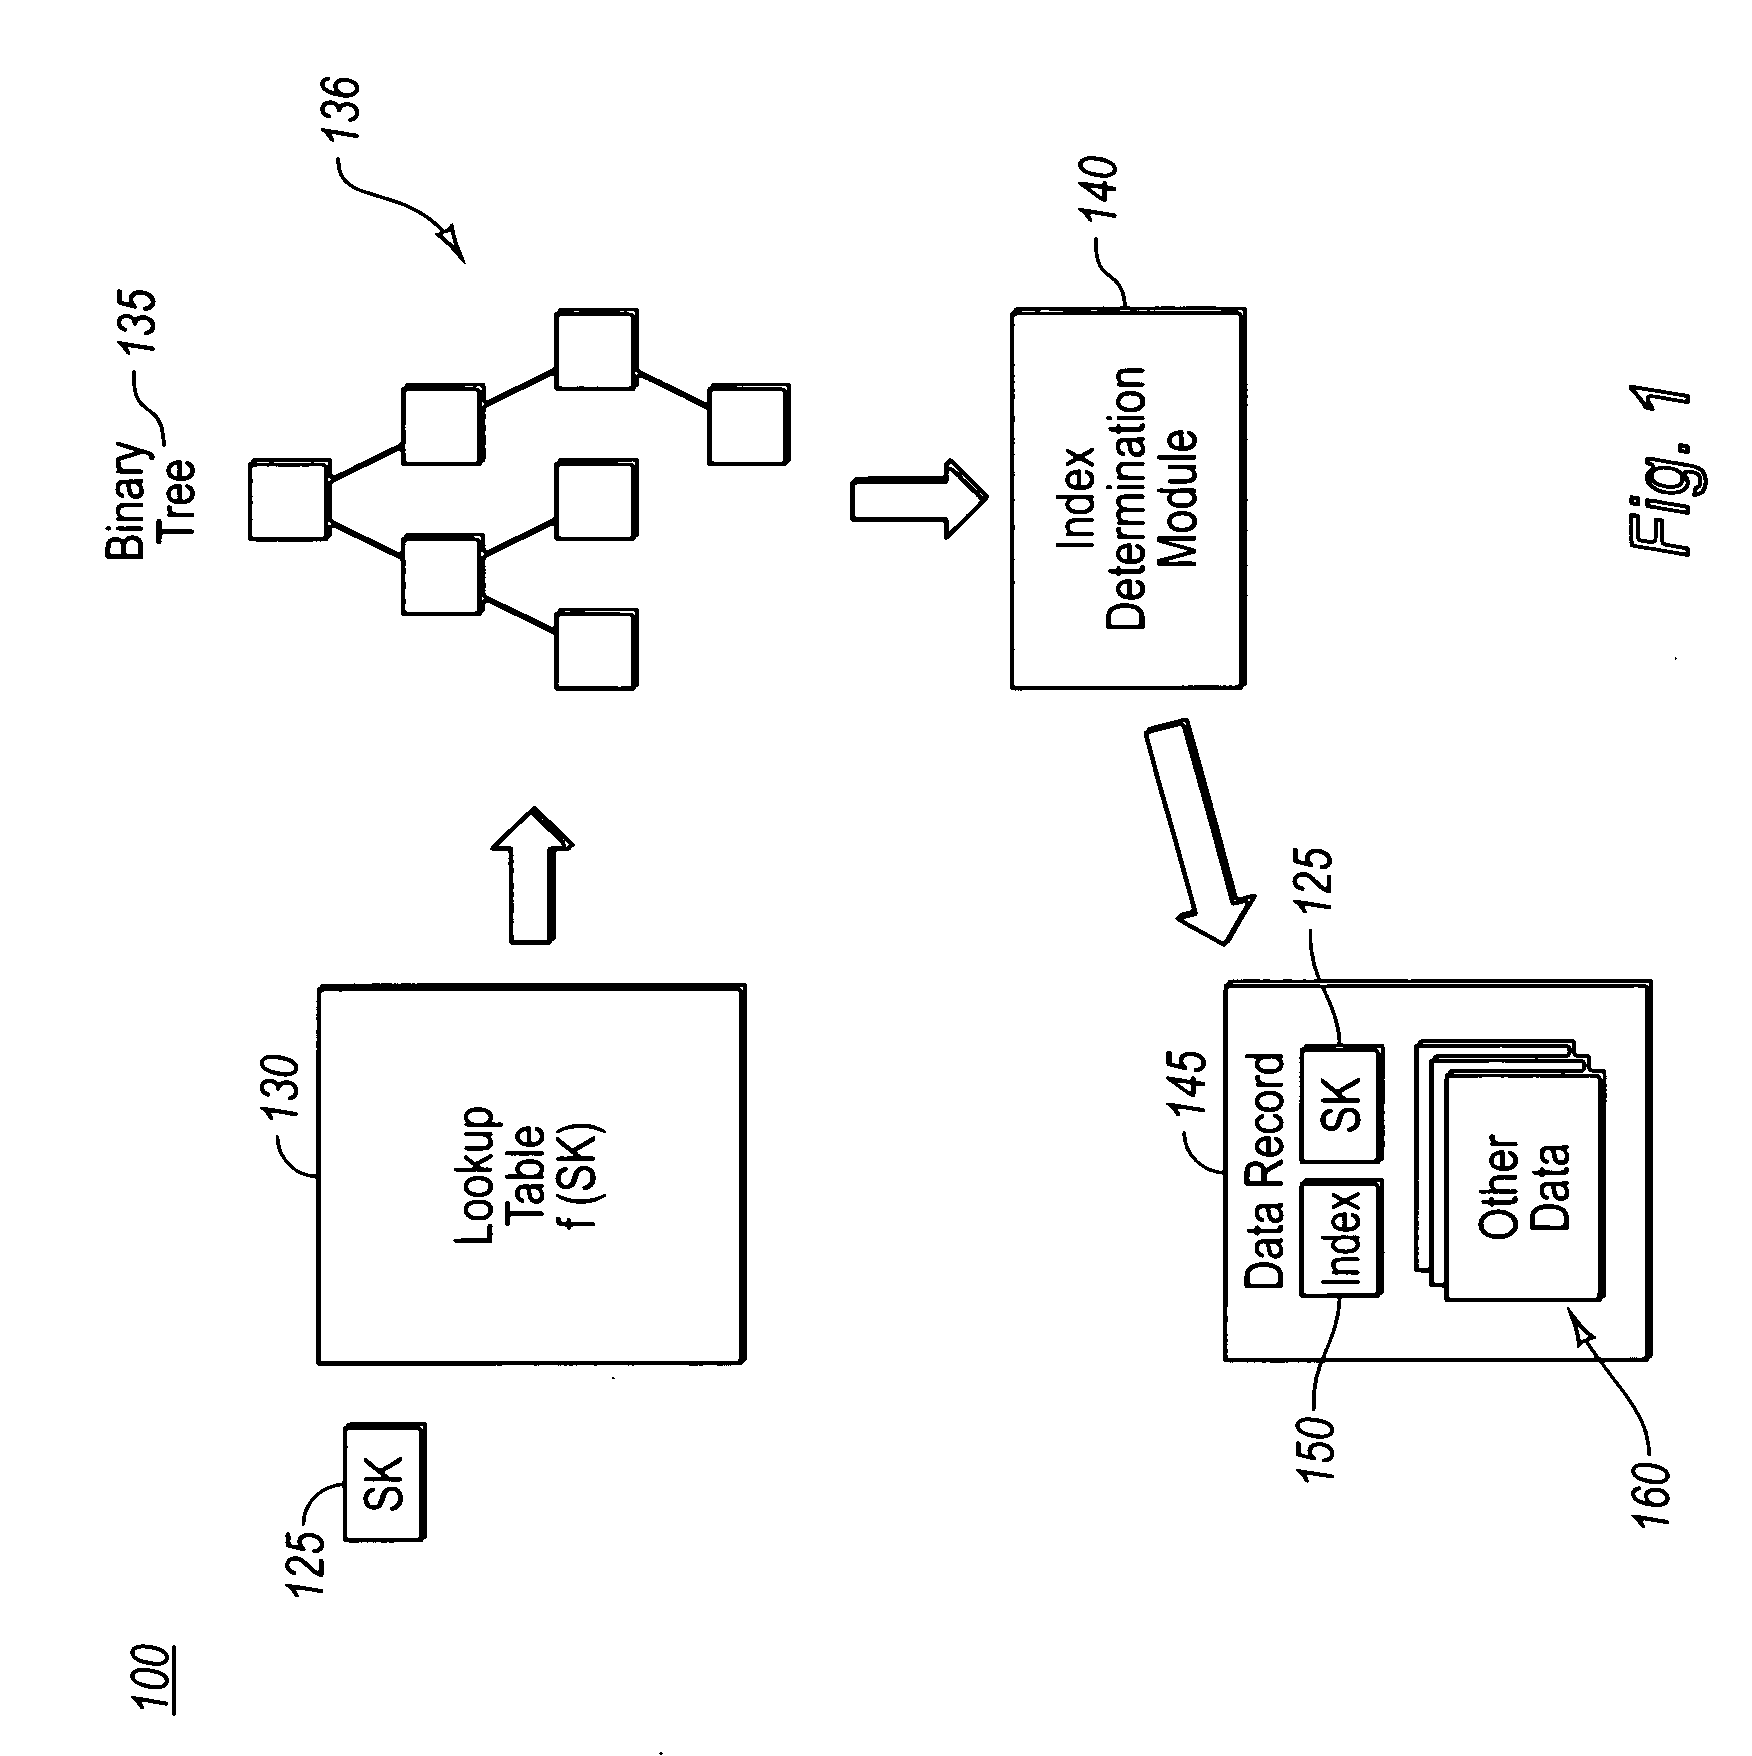 Scalable retrieval of data entries using an array index or a secondary key